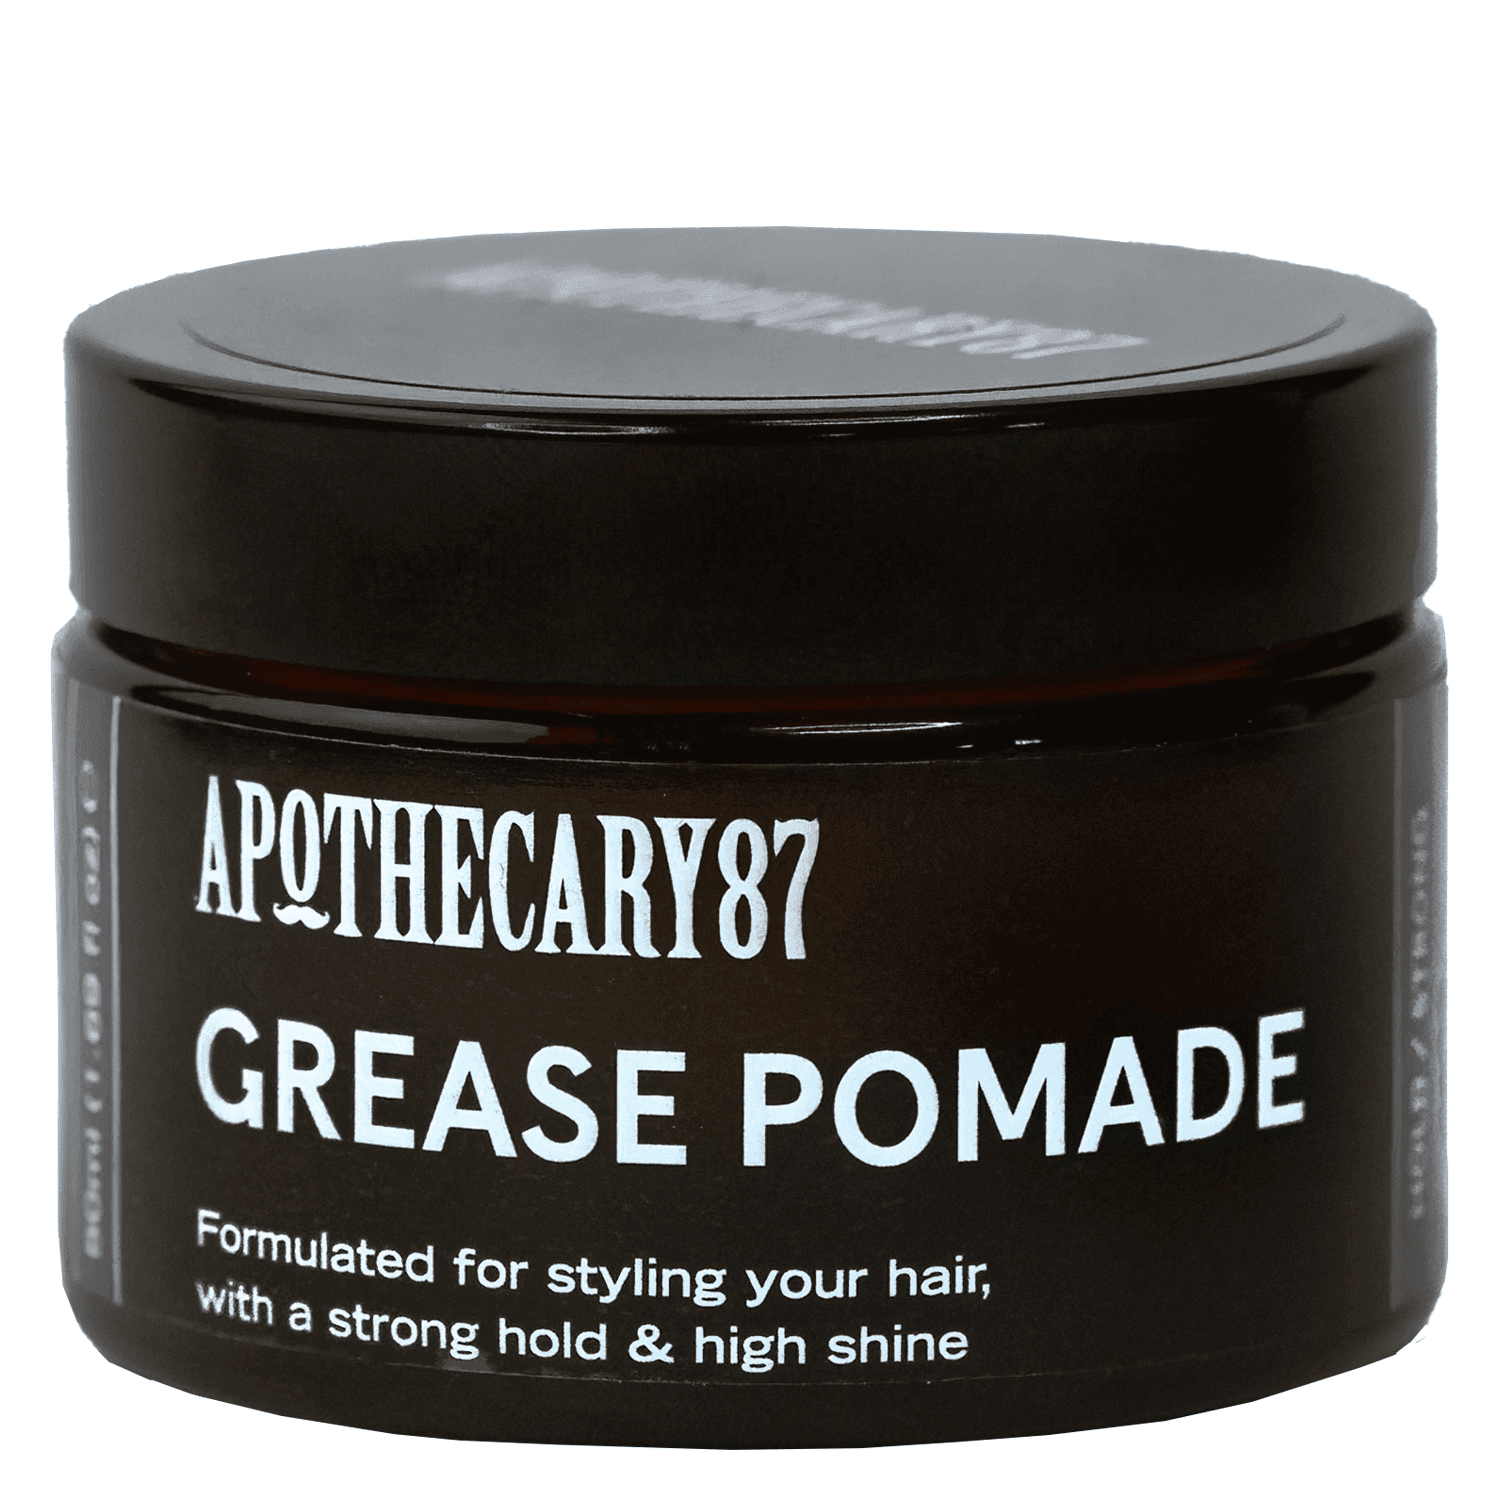 Apothecary87 Grooming - Grease Pomade